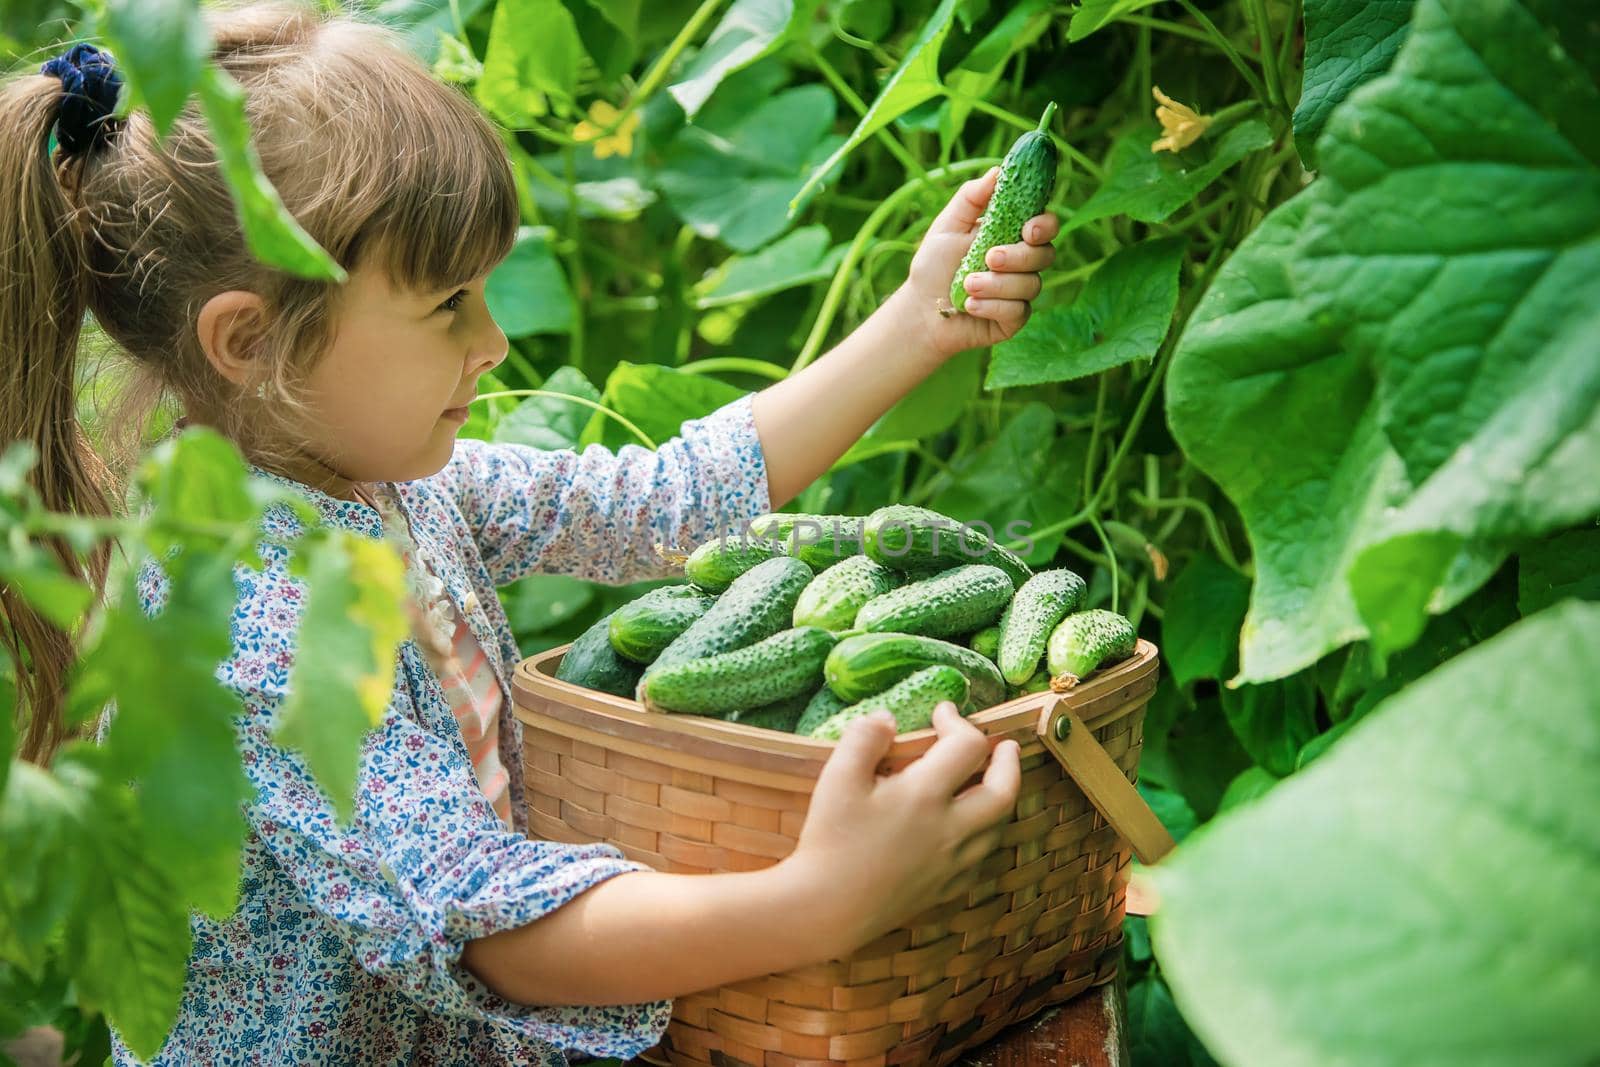 homemade cucumber cultivation and harvest in the hands of a child. selective focus.